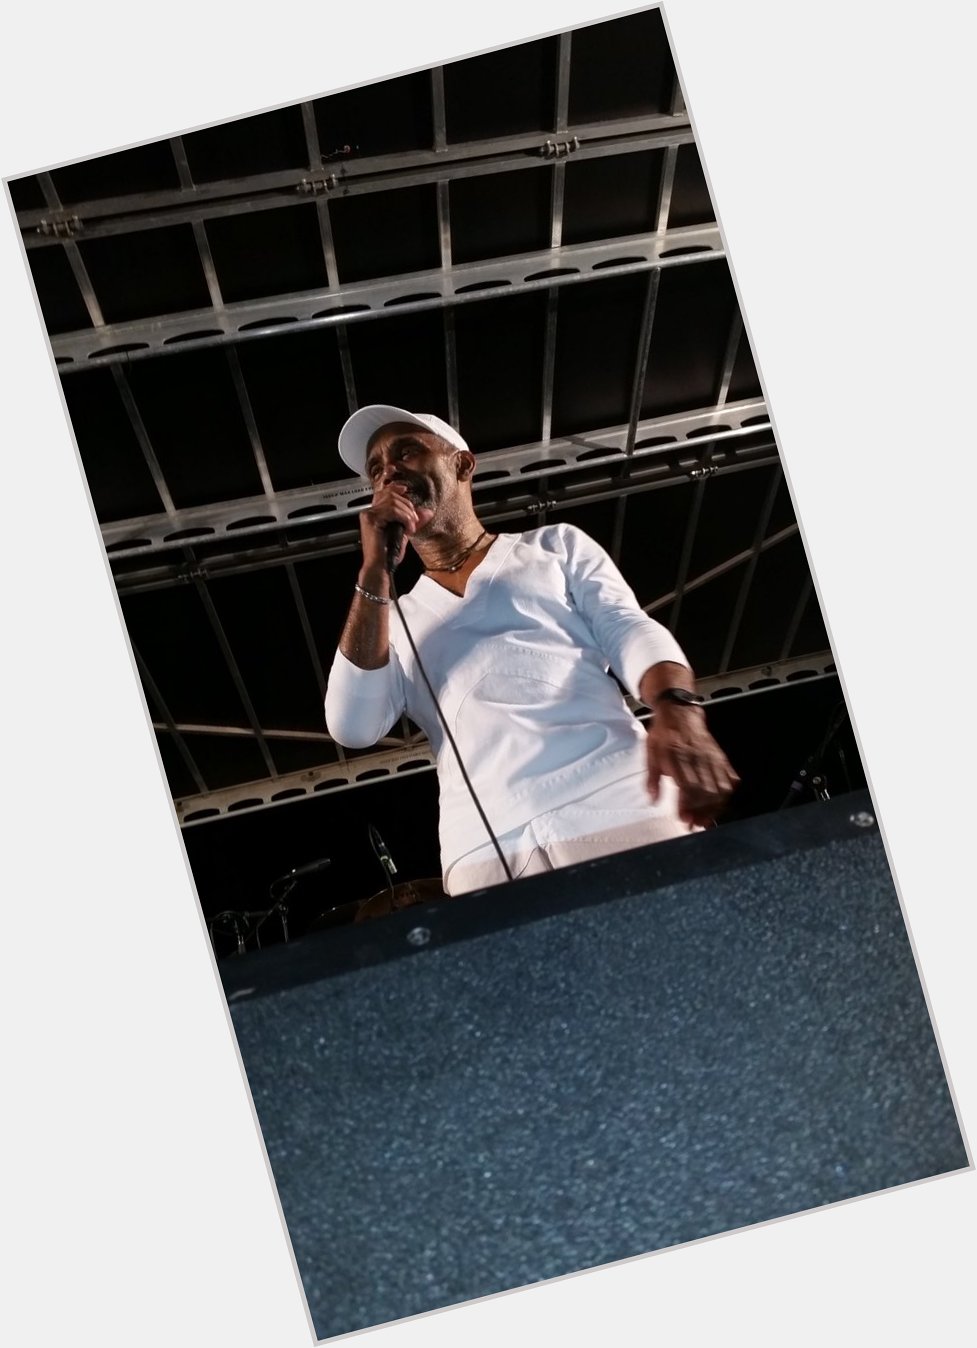 Happy Birthday Frankie Beverly 72 yrs young Blessed love me some him 